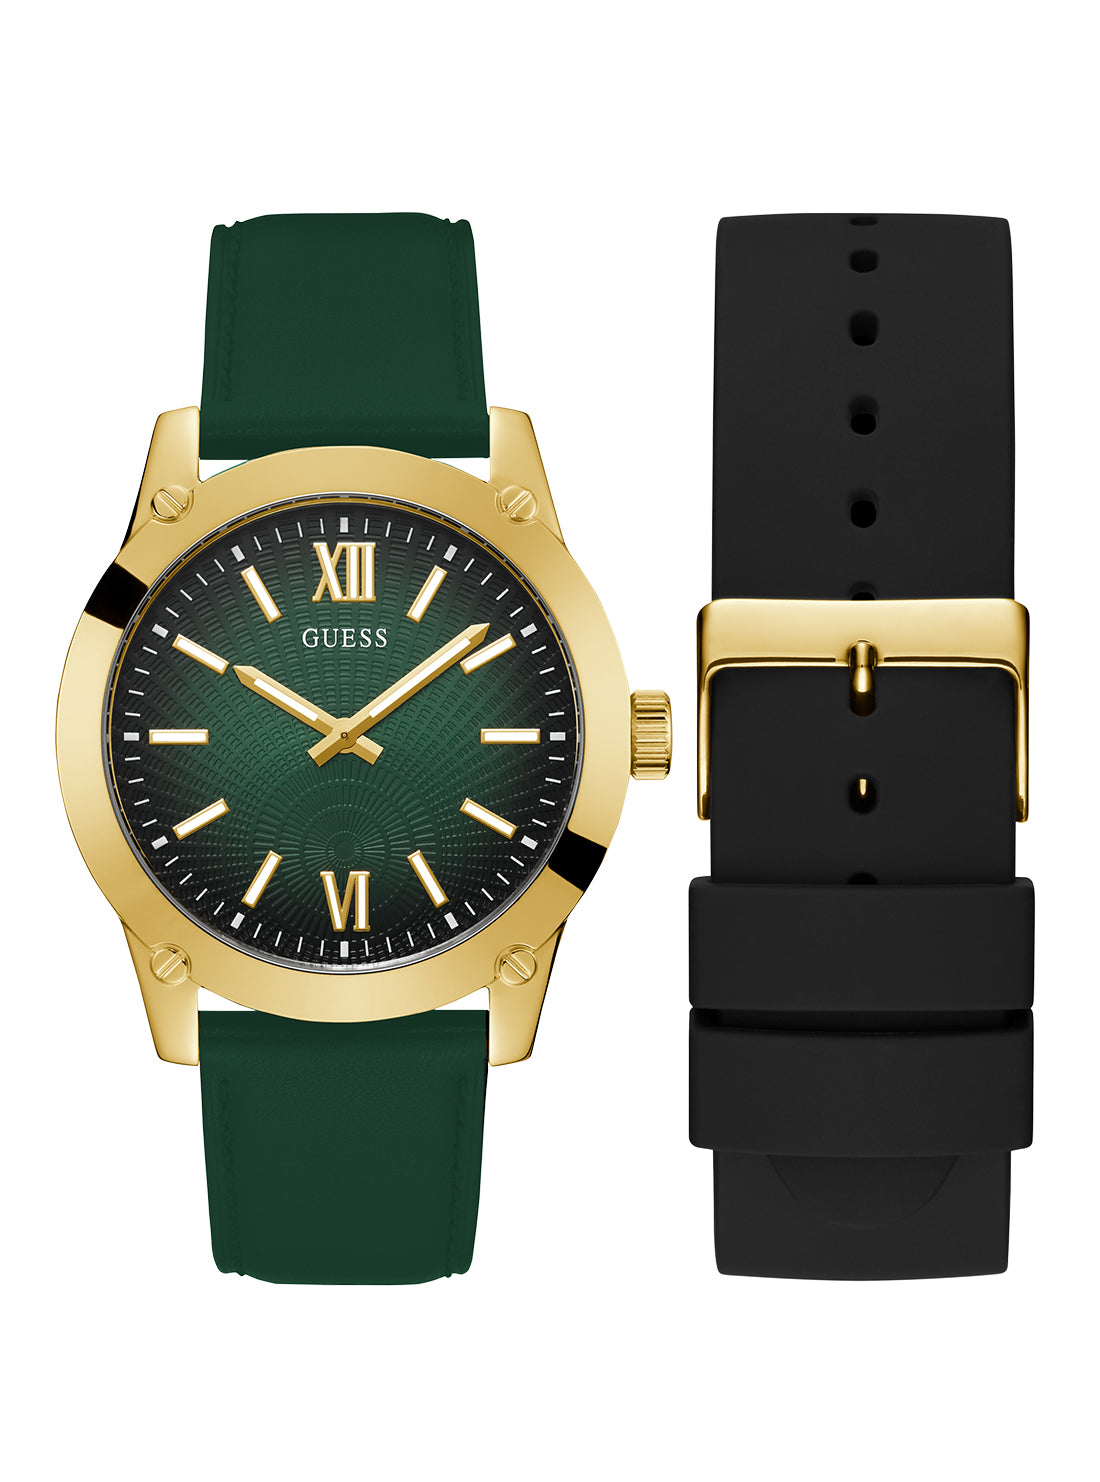 GUESS Men's Green Gold Crescent Silicone Watch GW0630G2 Front and Back View